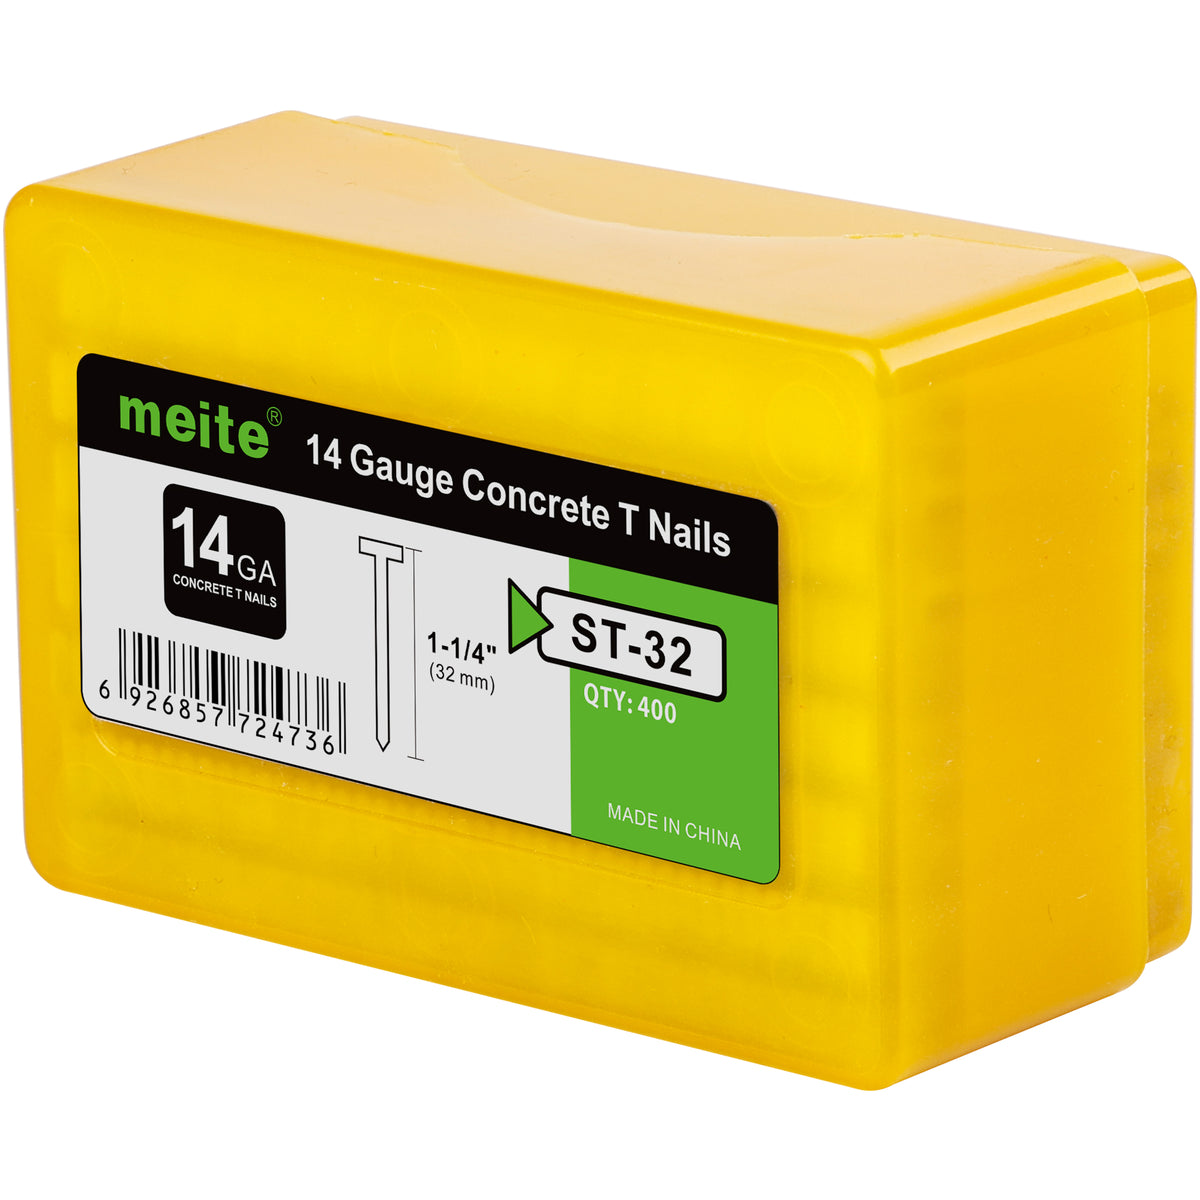 meite 14 Gauge Concrete T Nails Glue Collated Nails for Nailer (1-1/2" to 2") - MEITE USA